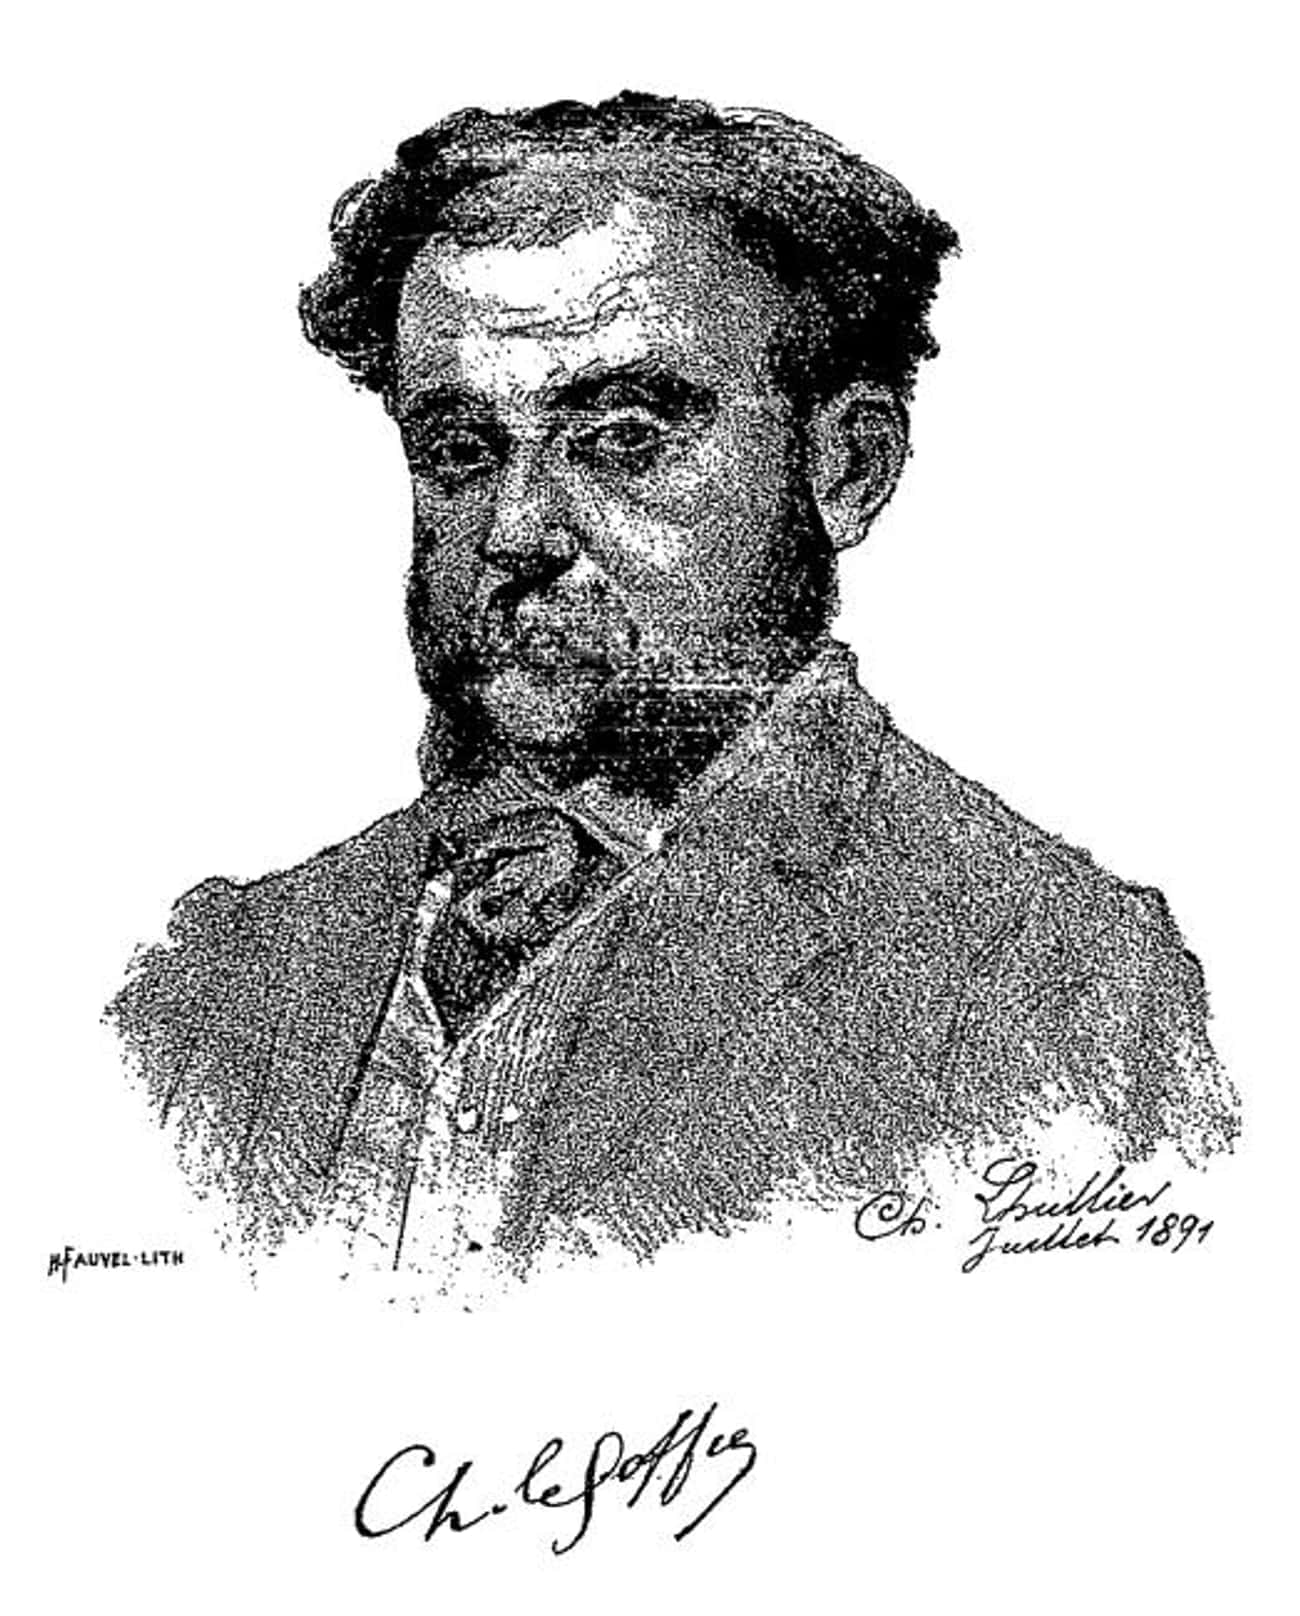 Charles Le Goffic